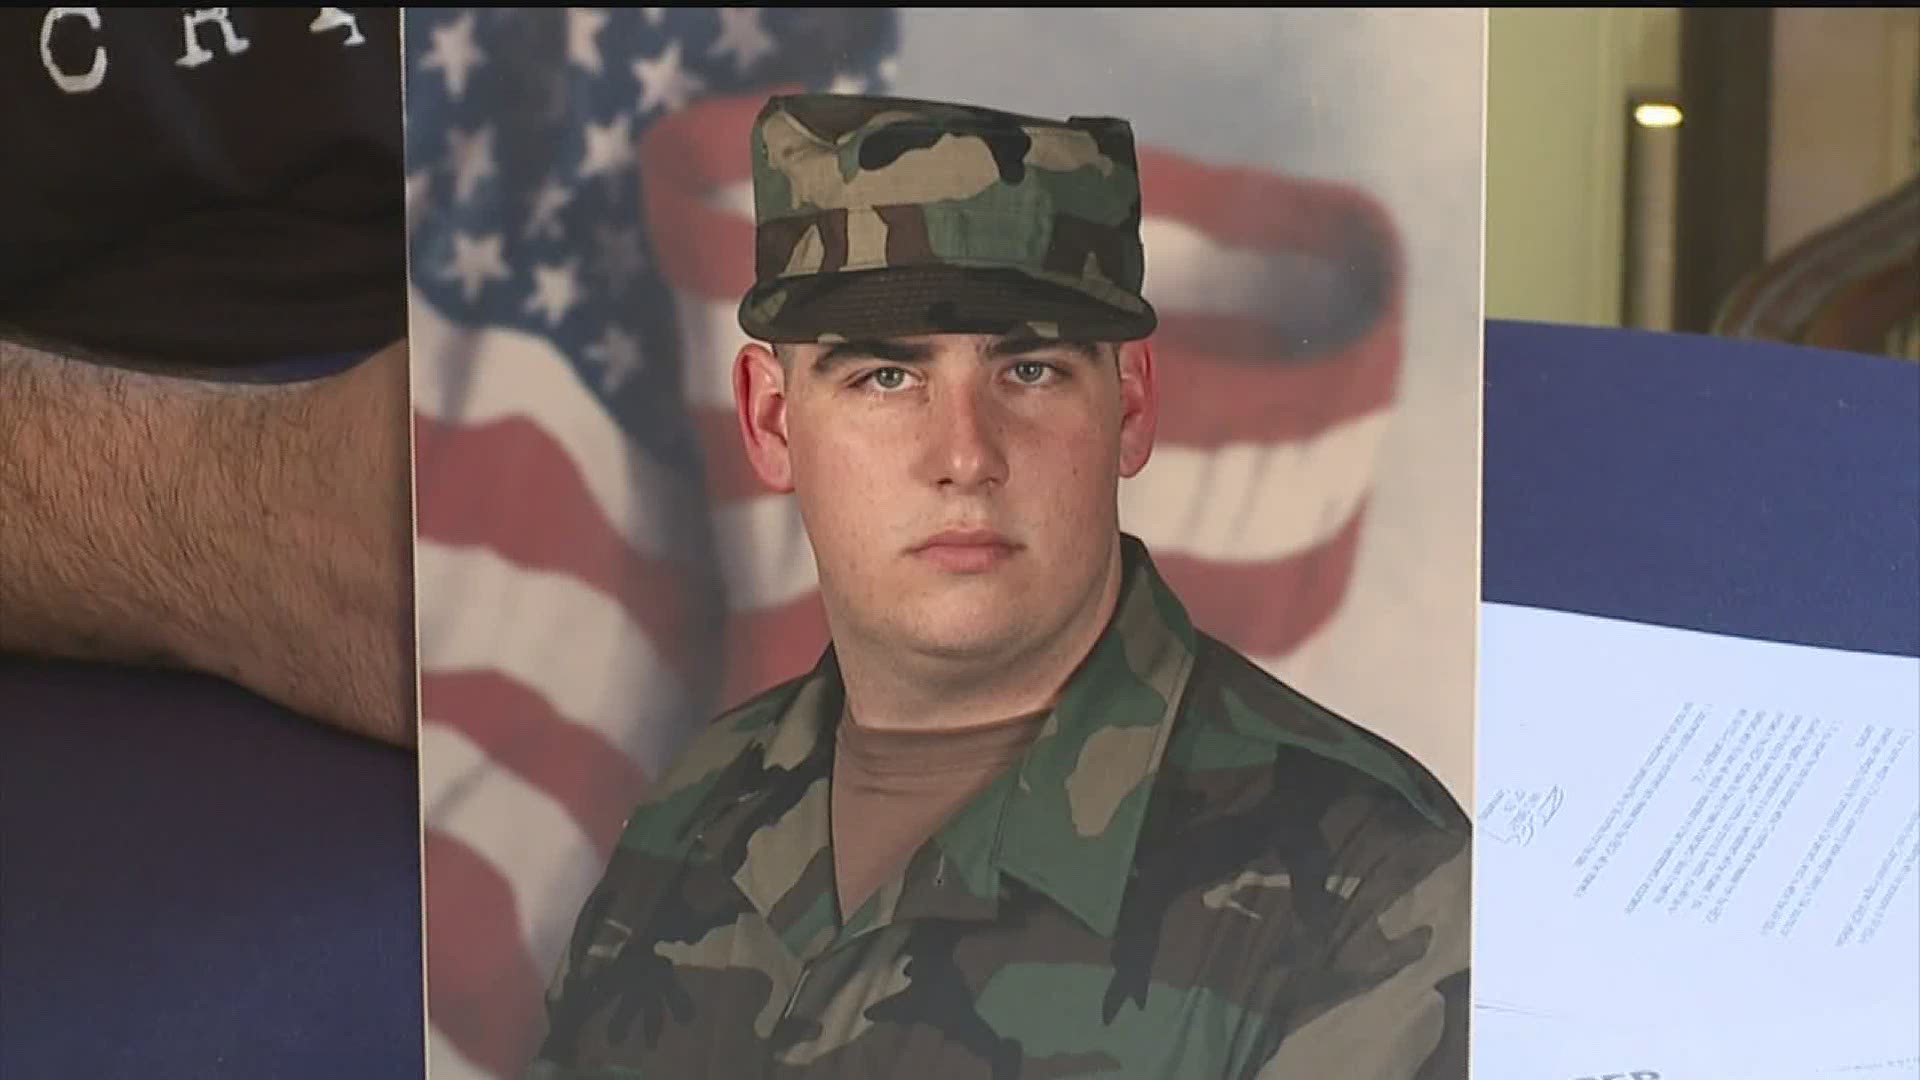 Joshua Bishop was the subject of a FOX43 investigation in 2017 as he was trying to get unpaid retirement benefits from the U.S. Army.